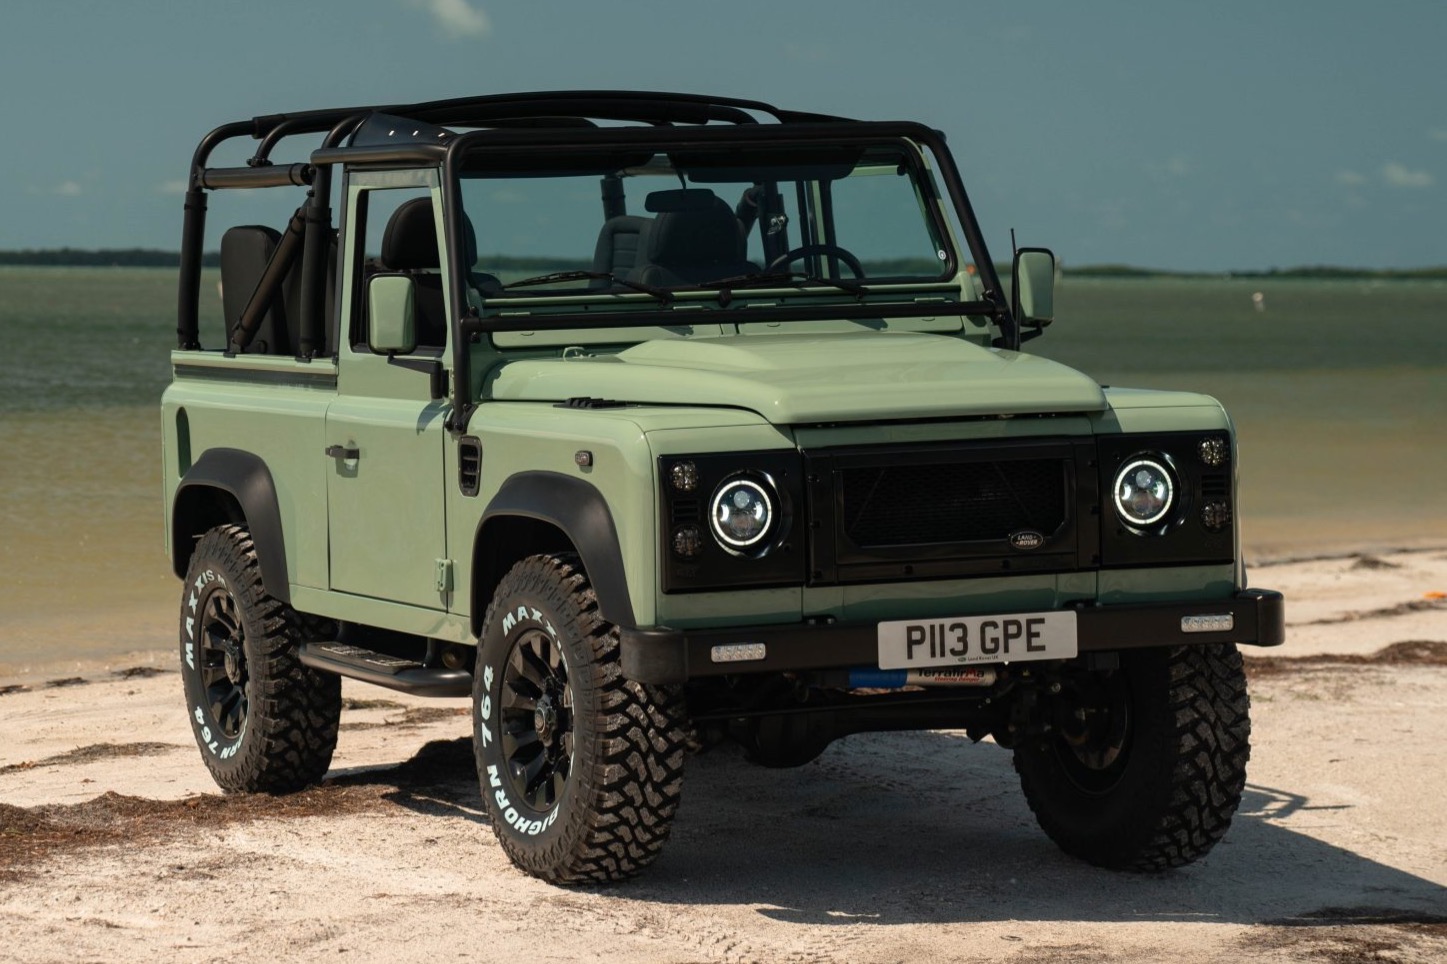 Used 1996 Land Rover Defender 90 2.0L MPi 5-Speed Review